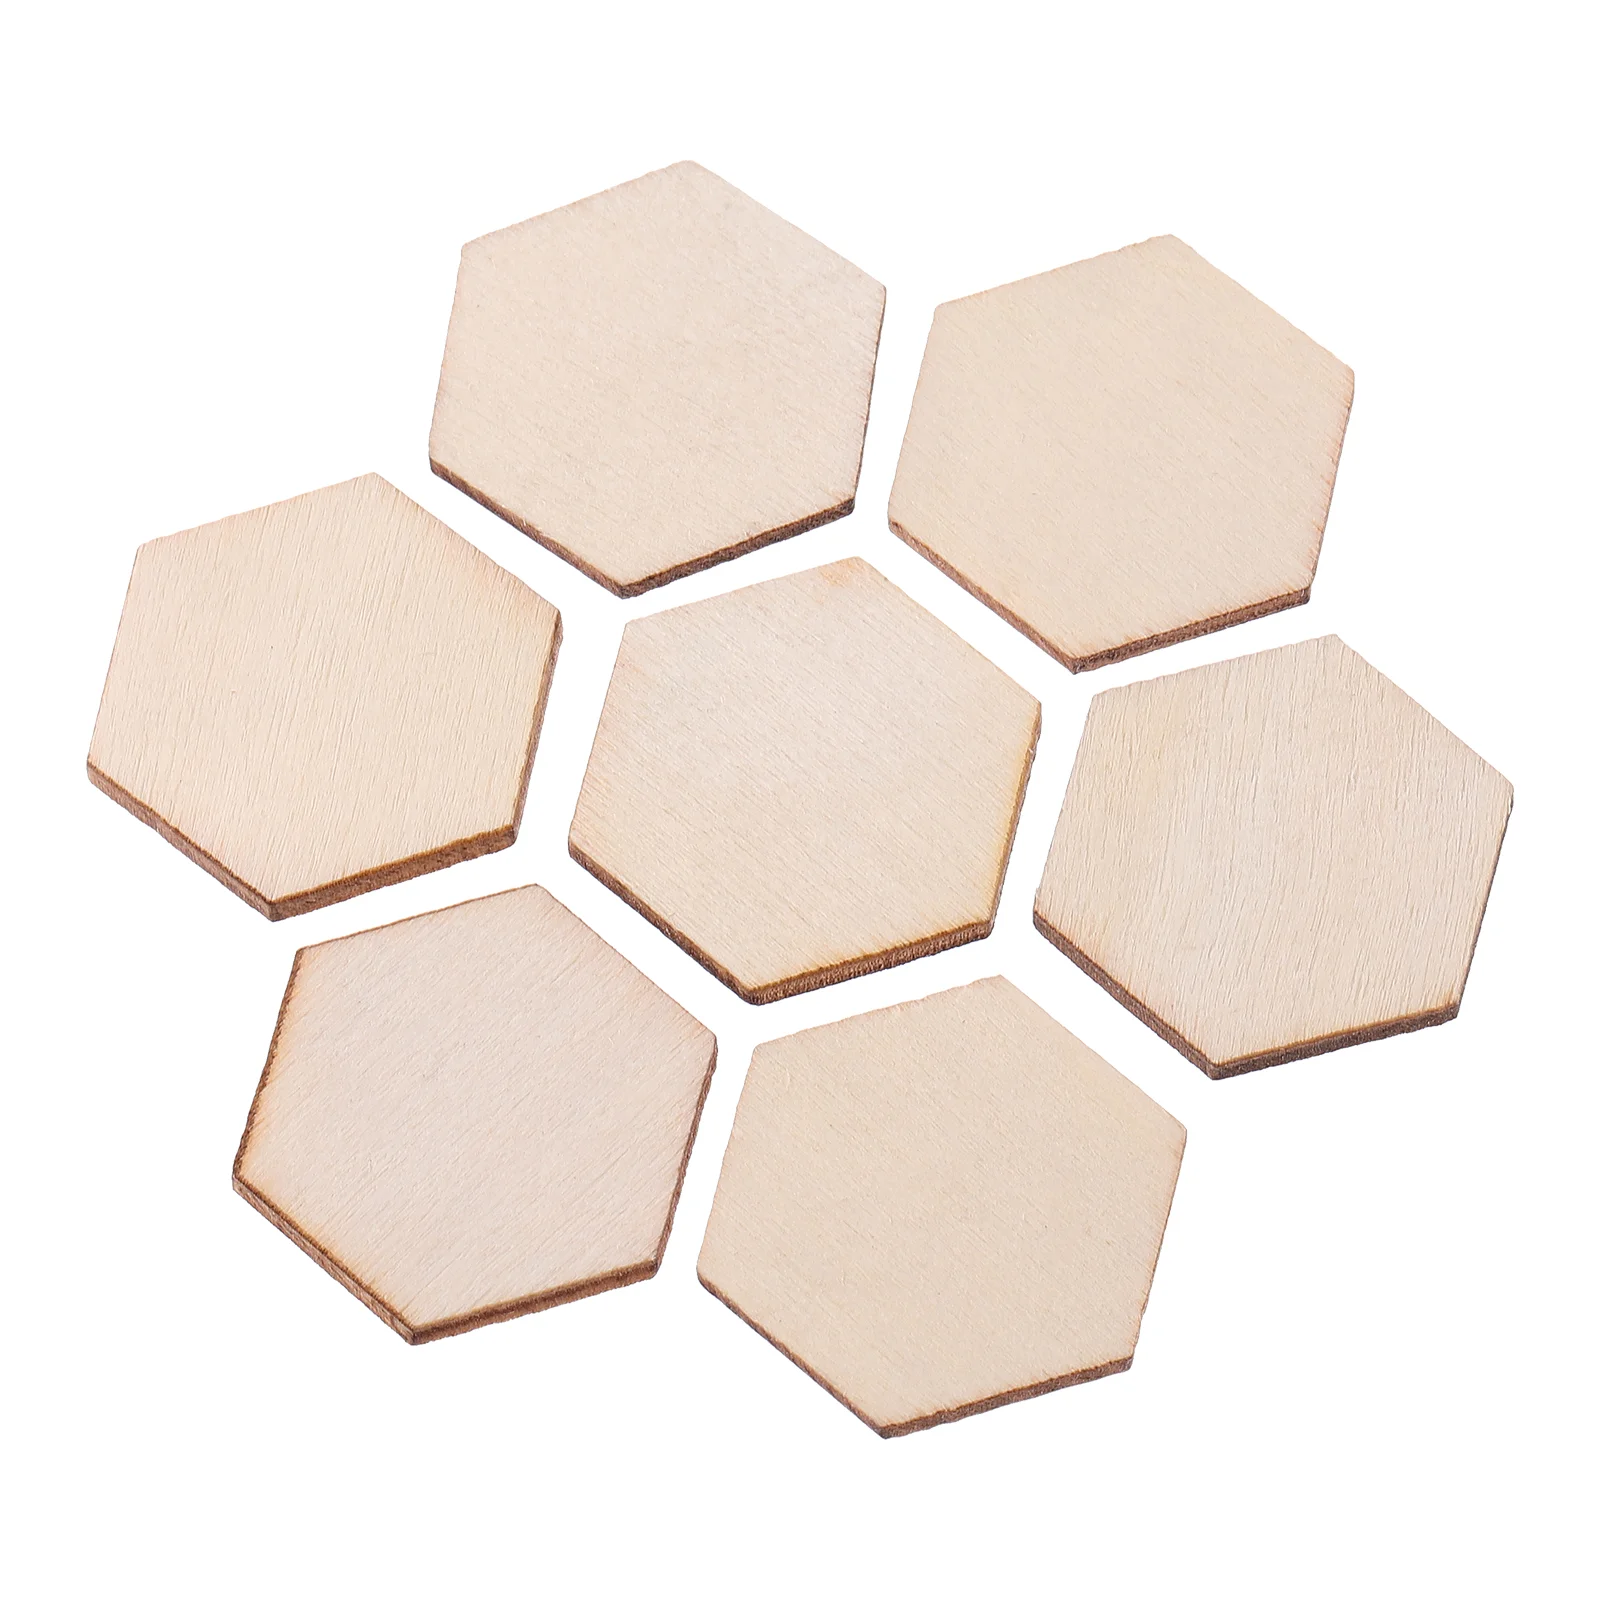 

Wood Hexagon Cutouts Pieces Unfinished Blank Tiles Wooden Crafts Slices Coasters Diy Chips Hexagonal 25Mm Board Natural